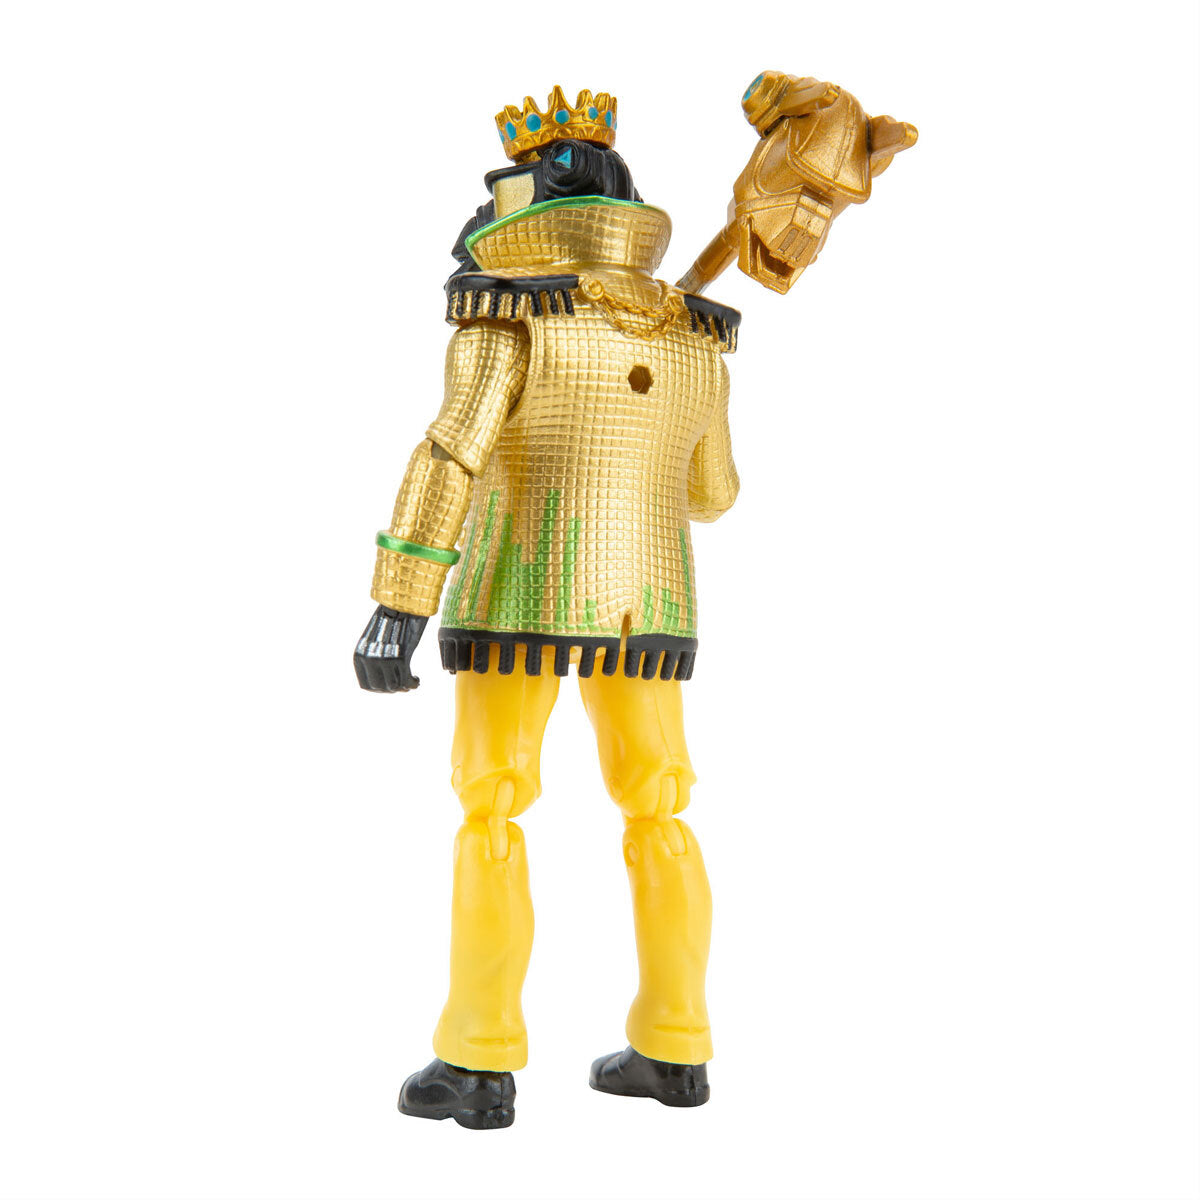 Fortnite Solo Mode 4 Figure - Yond3r (Solid Gold)